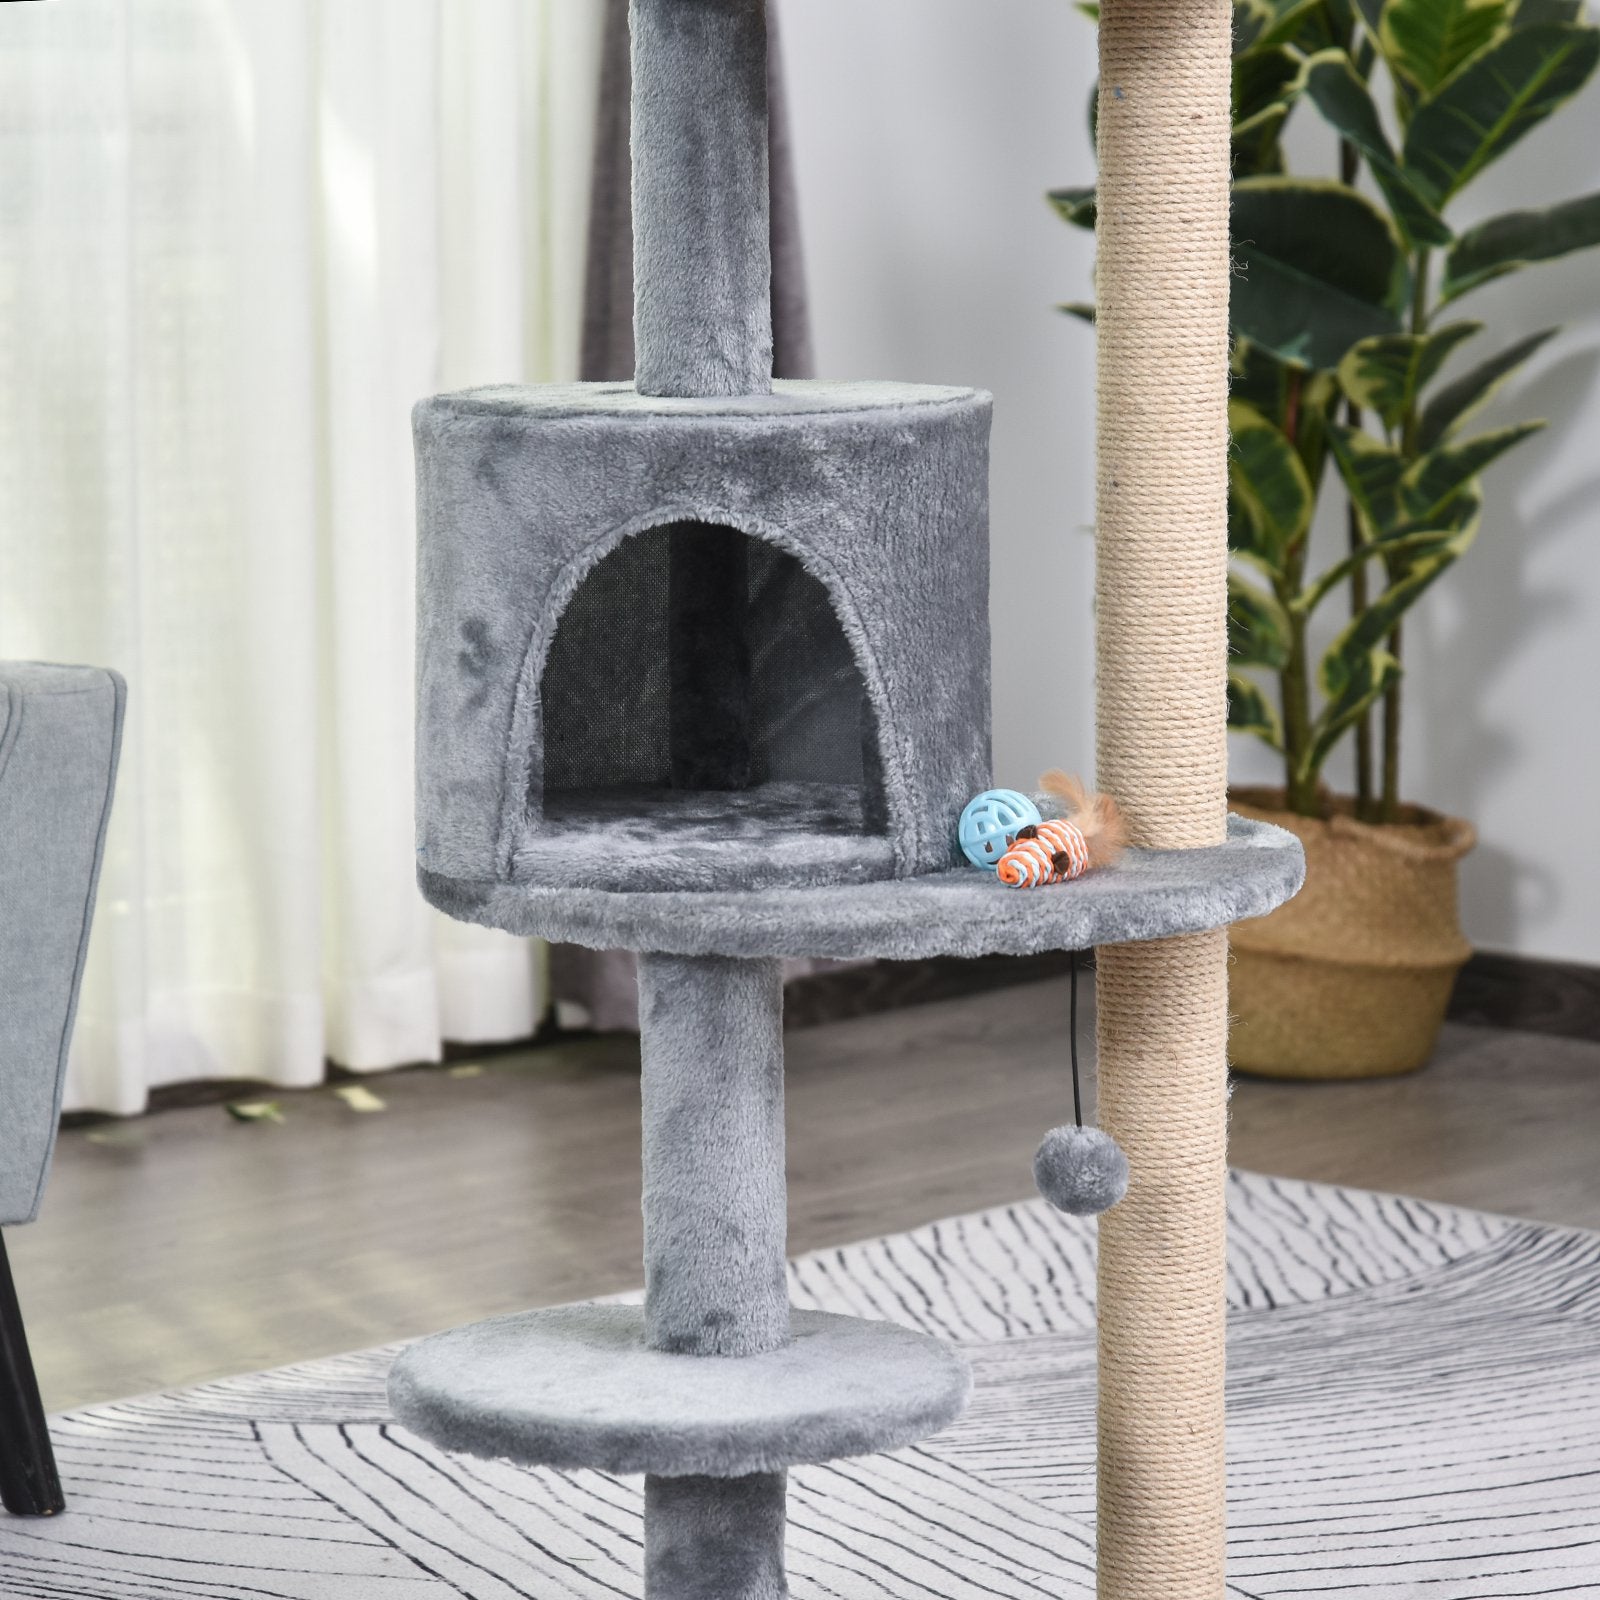 PawHut 3-Tier Deluxe Cat Activity Tree w/ Scratching Posts Ear Perch House Platform Play Ball Plush Fun Toys Exercise Rest Relax Climb Grey - Inspirely